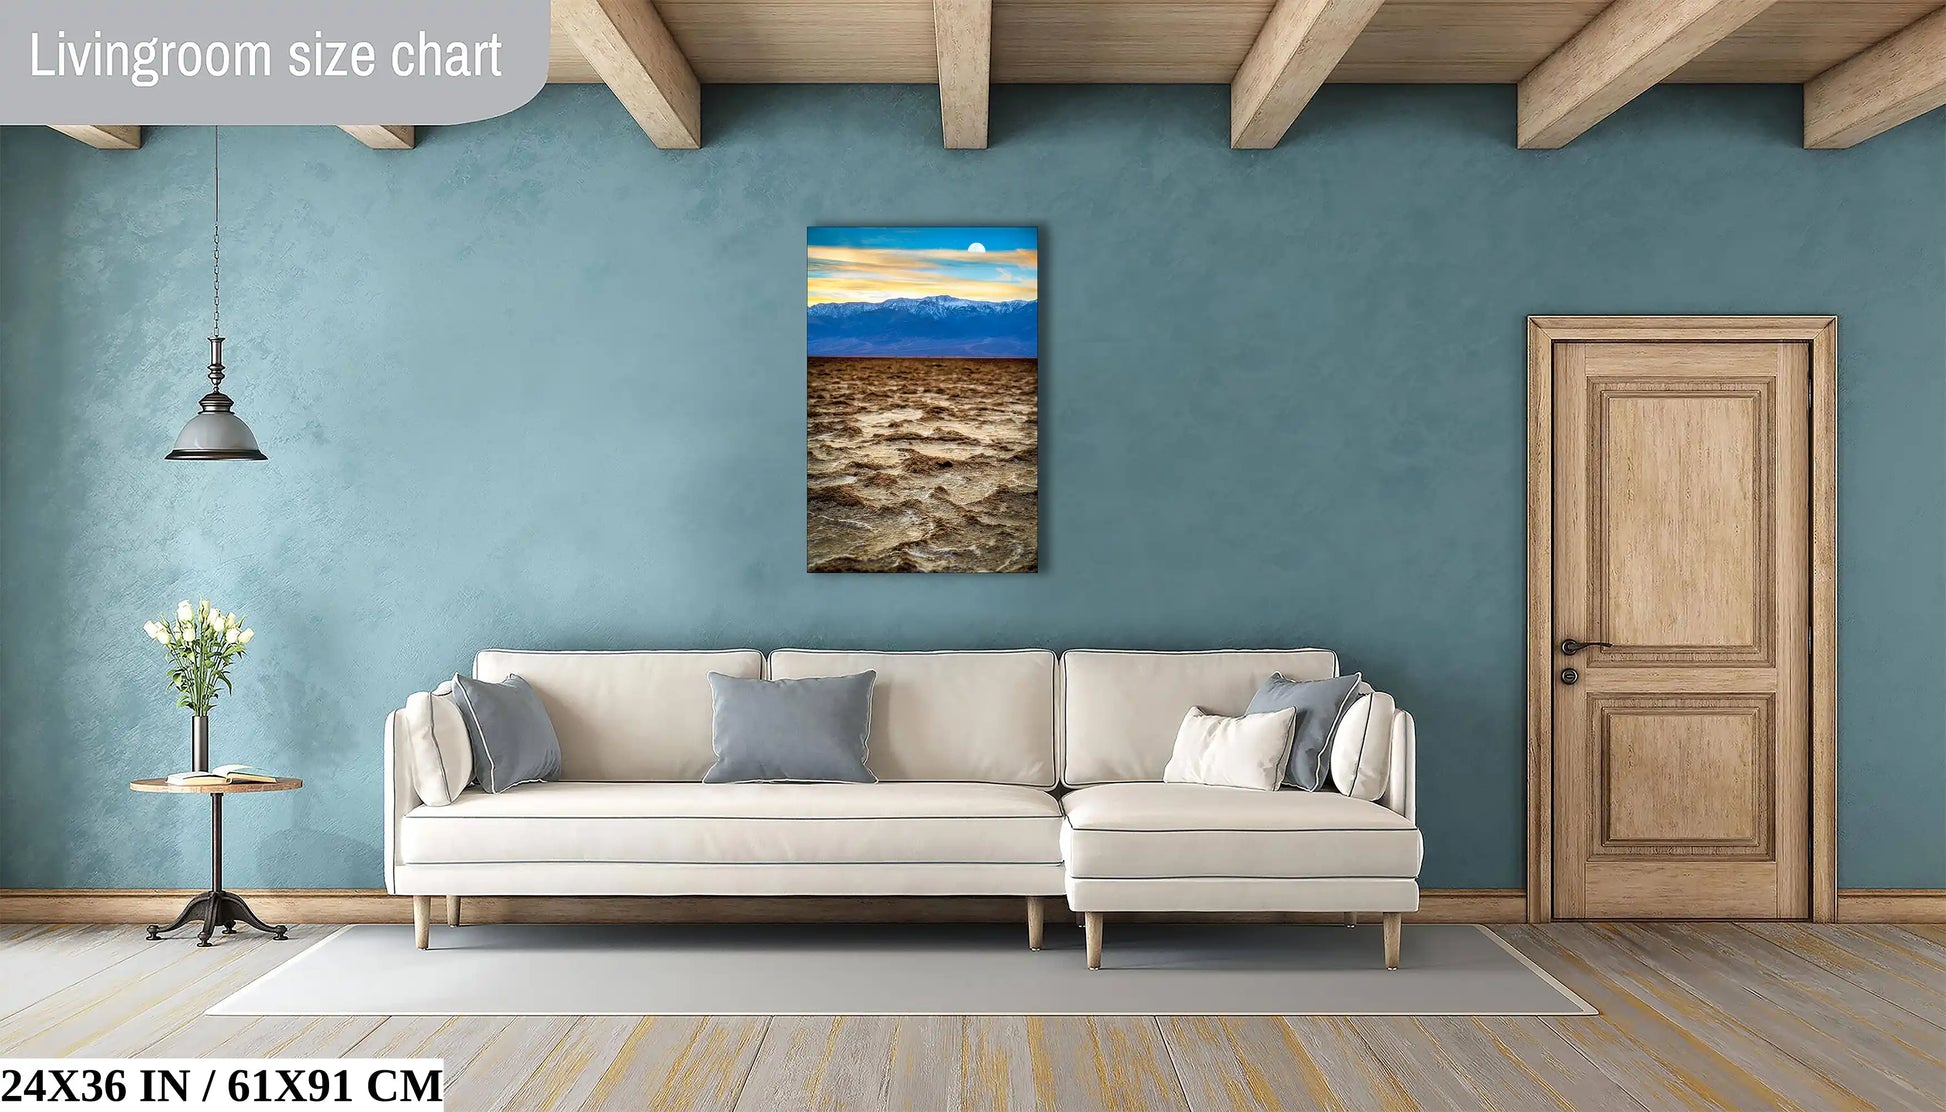 A large 24x36-inch canvas in a living room setting showcasing Death Valley's Badwater Basin, offering a natural and serene atmosphere.